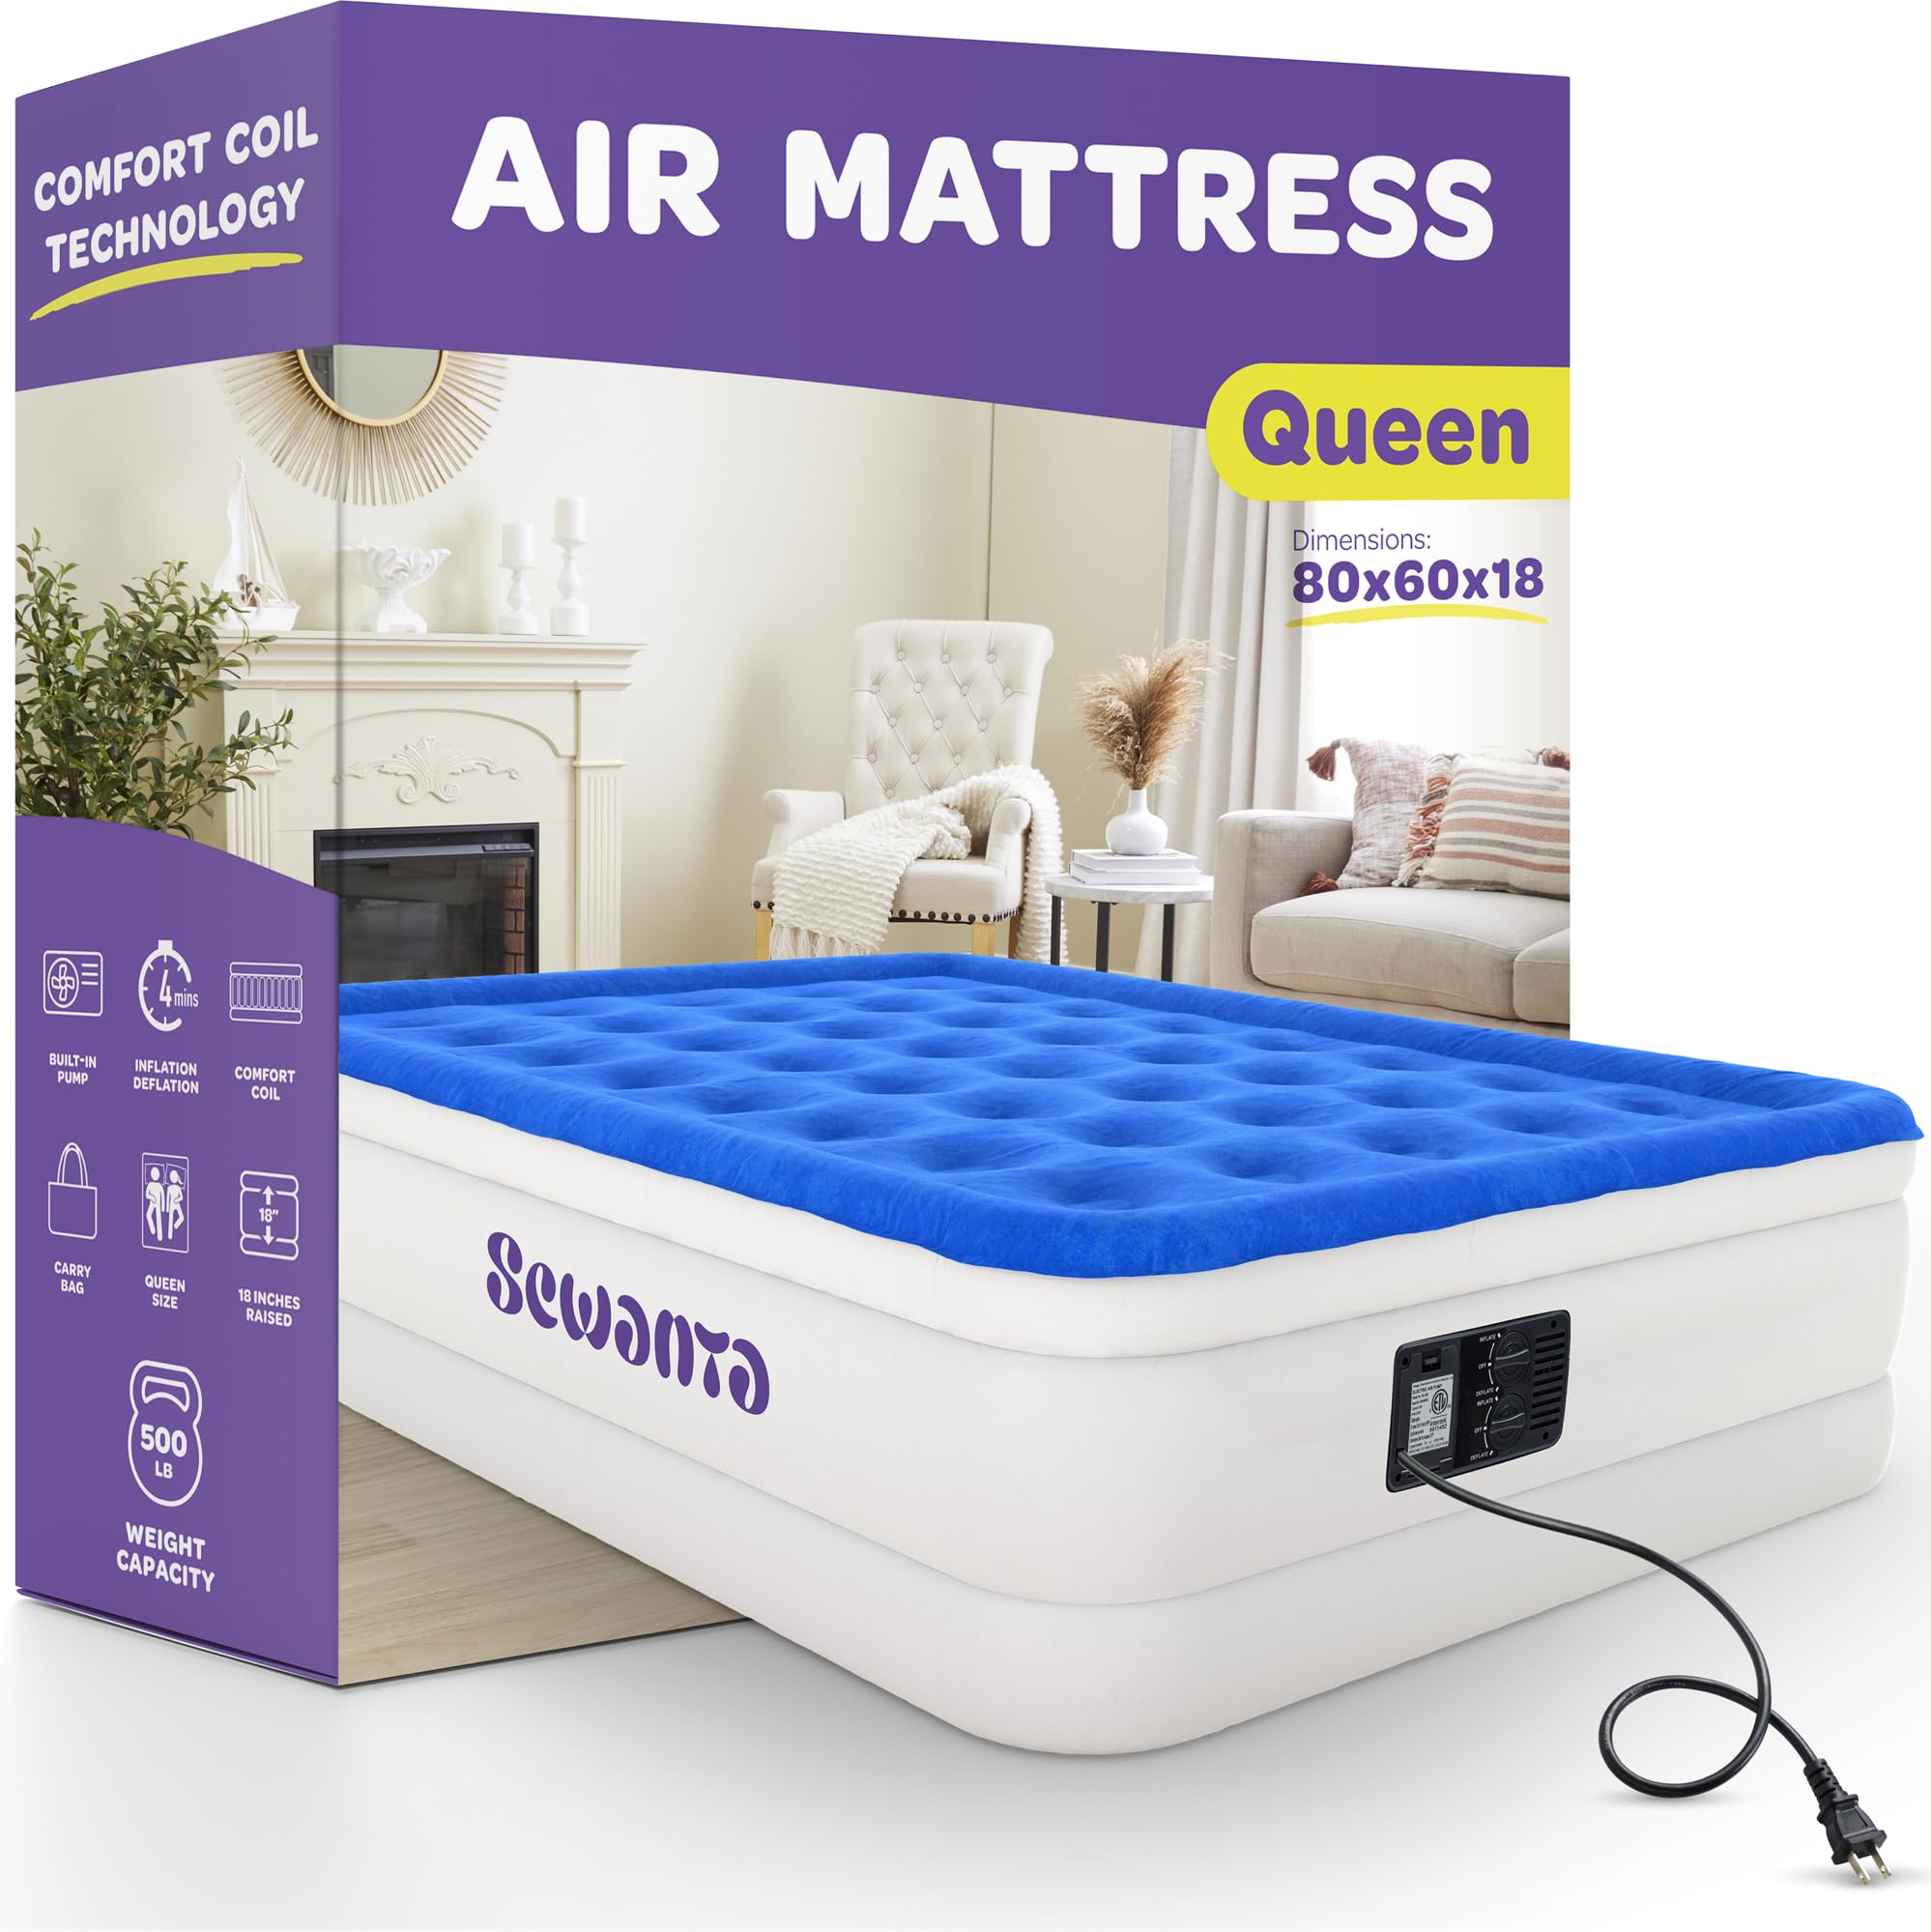 Air Mattress Queen Size, Luxury Air Mattress with Built in Pump, Plush Elevated with Comfort Coil Beam Technology - 18" Height Inflatable Mattress, Portable for Home/Camping/Guests (300Lb. Capacity)  - Like New